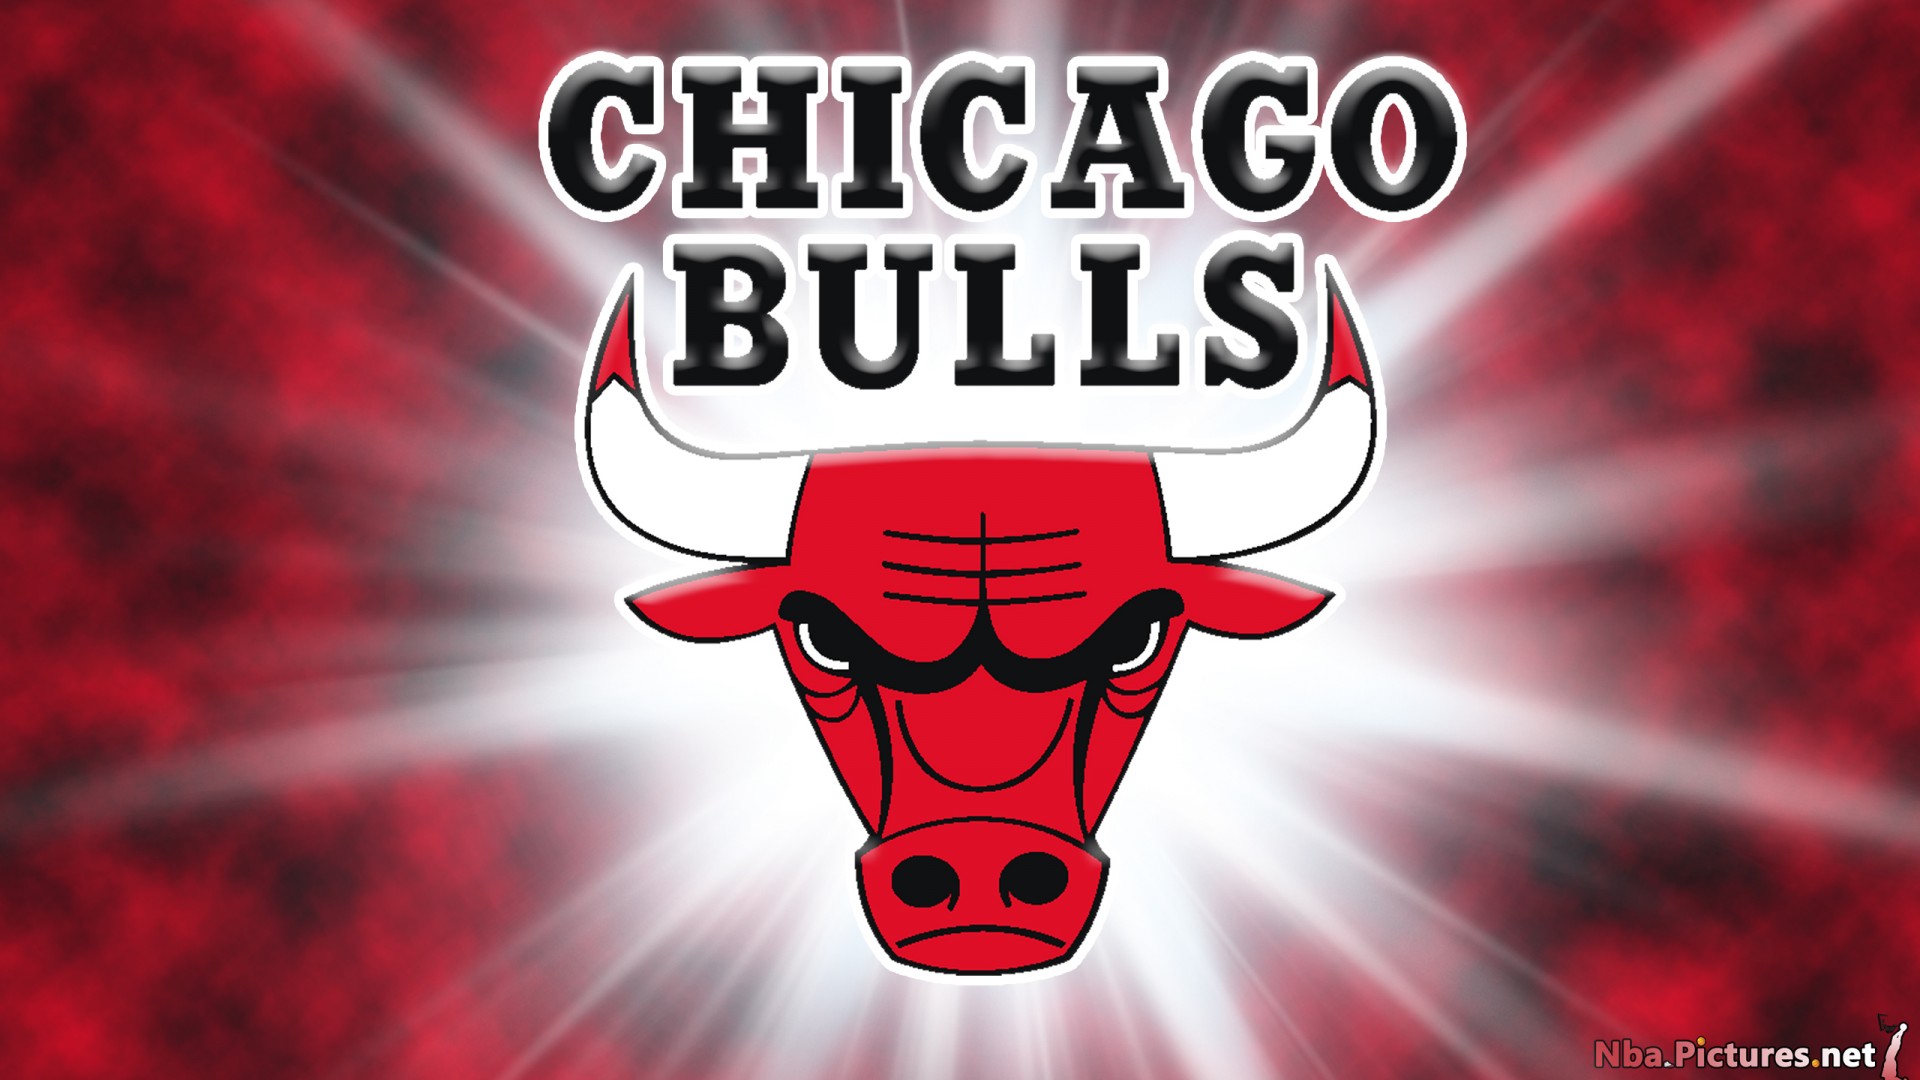 Preparing For the Playoffs With the Chicago Bulls